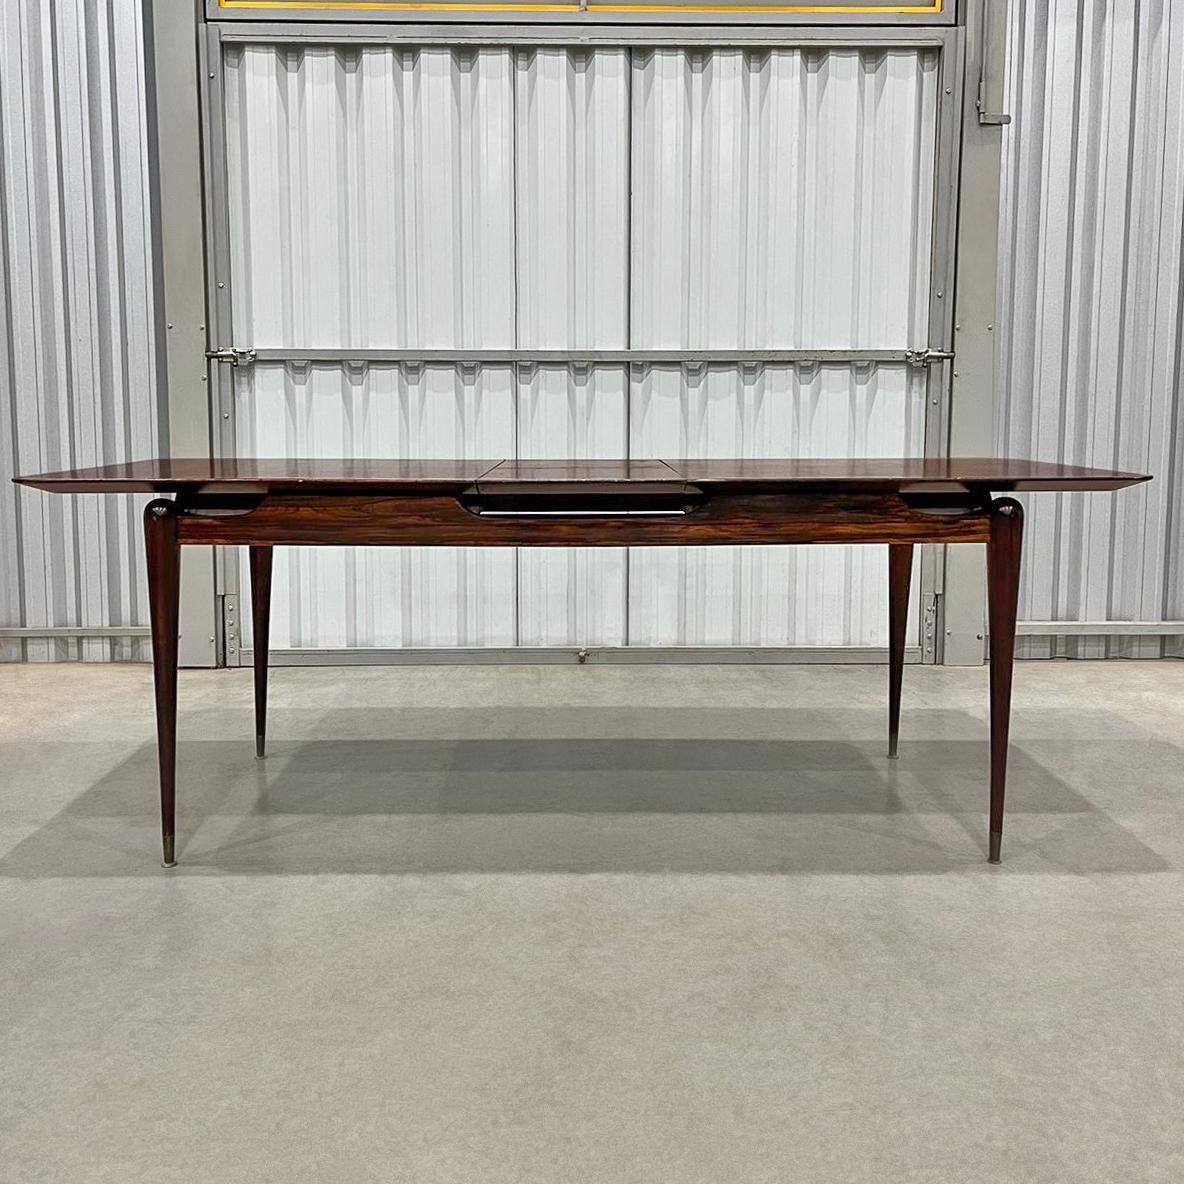 Available today in NYC with free shipping included, this Extendable Dining Table in Hardwood by Giuseppe Scapinelli, made in the 1950s in Brazil is nothing less than spectacular!

This extendable dining table in hardwood was designed by Giuseppe